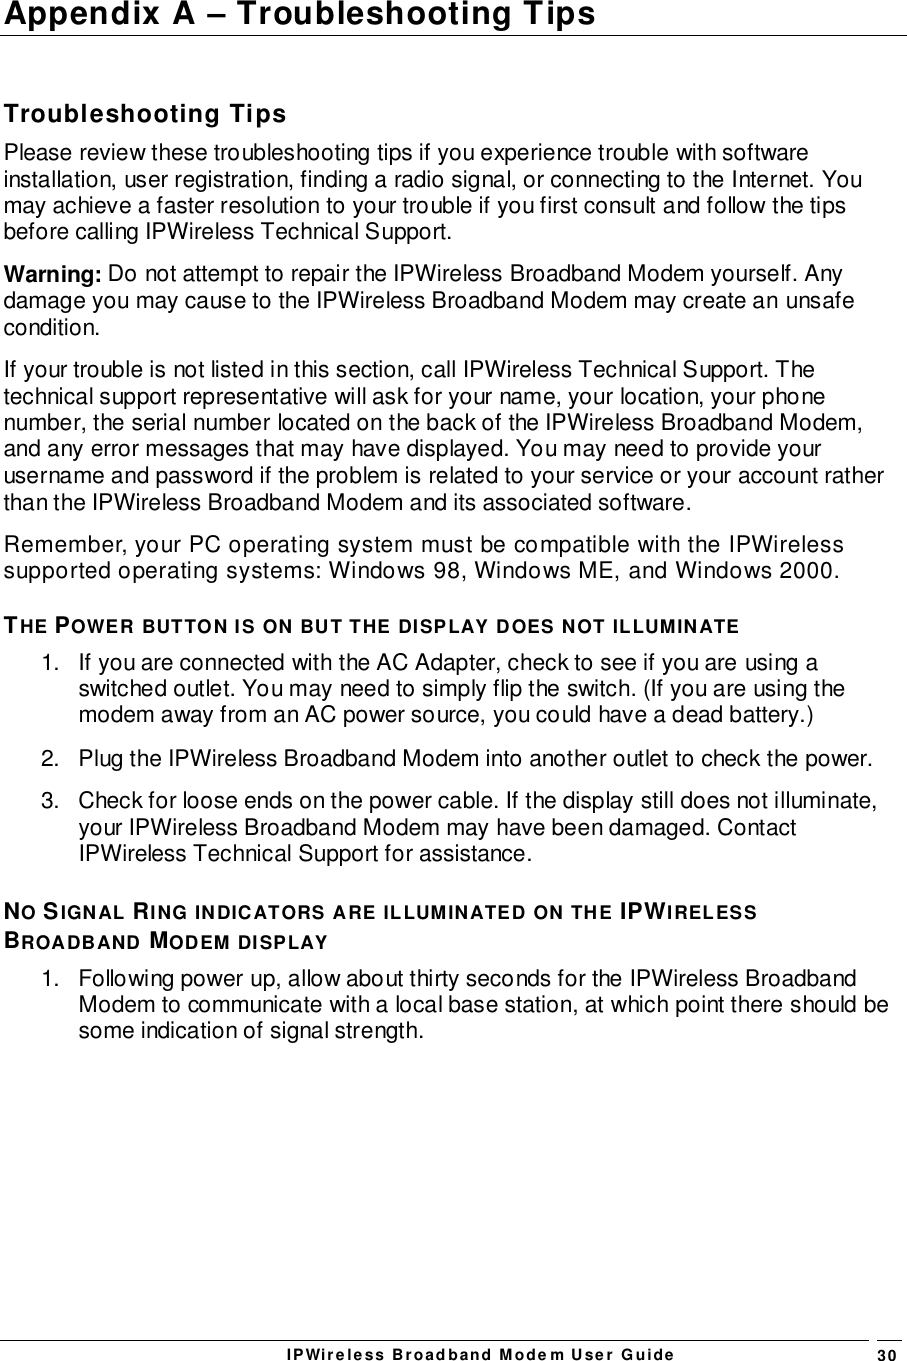 IPWireless Broadband Modem User Guide 30Appendix A – Troubleshooting TipsTroubleshooting TipsPlease review these troubleshooting tips if you experience trouble with softwareinstallation, user registration, finding a radio signal, or connecting to the Internet. Youmay achieve a faster resolution to your trouble if you first consult and follow the tipsbefore calling IPWireless Technical Support.Warning: Do not attempt to repair the IPWireless Broadband Modem yourself. Anydamage you may cause to the IPWireless Broadband Modem may create an unsafecondition.If your trouble is not listed in this section, call IPWireless Technical Support. Thetechnical support representative will ask for your name, your location, your phonenumber, the serial number located on the back of the IPWireless Broadband Modem,and any error messages that may have displayed. You may need to provide yourusername and password if the problem is related to your service or your account ratherthan the IPWireless Broadband Modem and its associated software.Remember, your PC operating system must be compatible with the IPWirelesssupported operating systems: Windows 98, Windows ME, and Windows 2000.THE POWER BUTTON IS ON BUT THE DISPLAY DOES NOT ILLUMINATE1.  If you are connected with the AC Adapter, check to see if you are using aswitched outlet. You may need to simply flip the switch. (If you are using themodem away from an AC power source, you could have a dead battery.)2.  Plug the IPWireless Broadband Modem into another outlet to check the power.3.  Check for loose ends on the power cable. If the display still does not illuminate,your IPWireless Broadband Modem may have been damaged. ContactIPWireless Technical Support for assistance.NO SIGNAL RING INDICATORS ARE ILLUMINATED ON THE IPWIRELESSBROADBAND MODEM DISPLAY1.  Following power up, allow about thirty seconds for the IPWireless BroadbandModem to communicate with a local base station, at which point there should besome indication of signal strength.